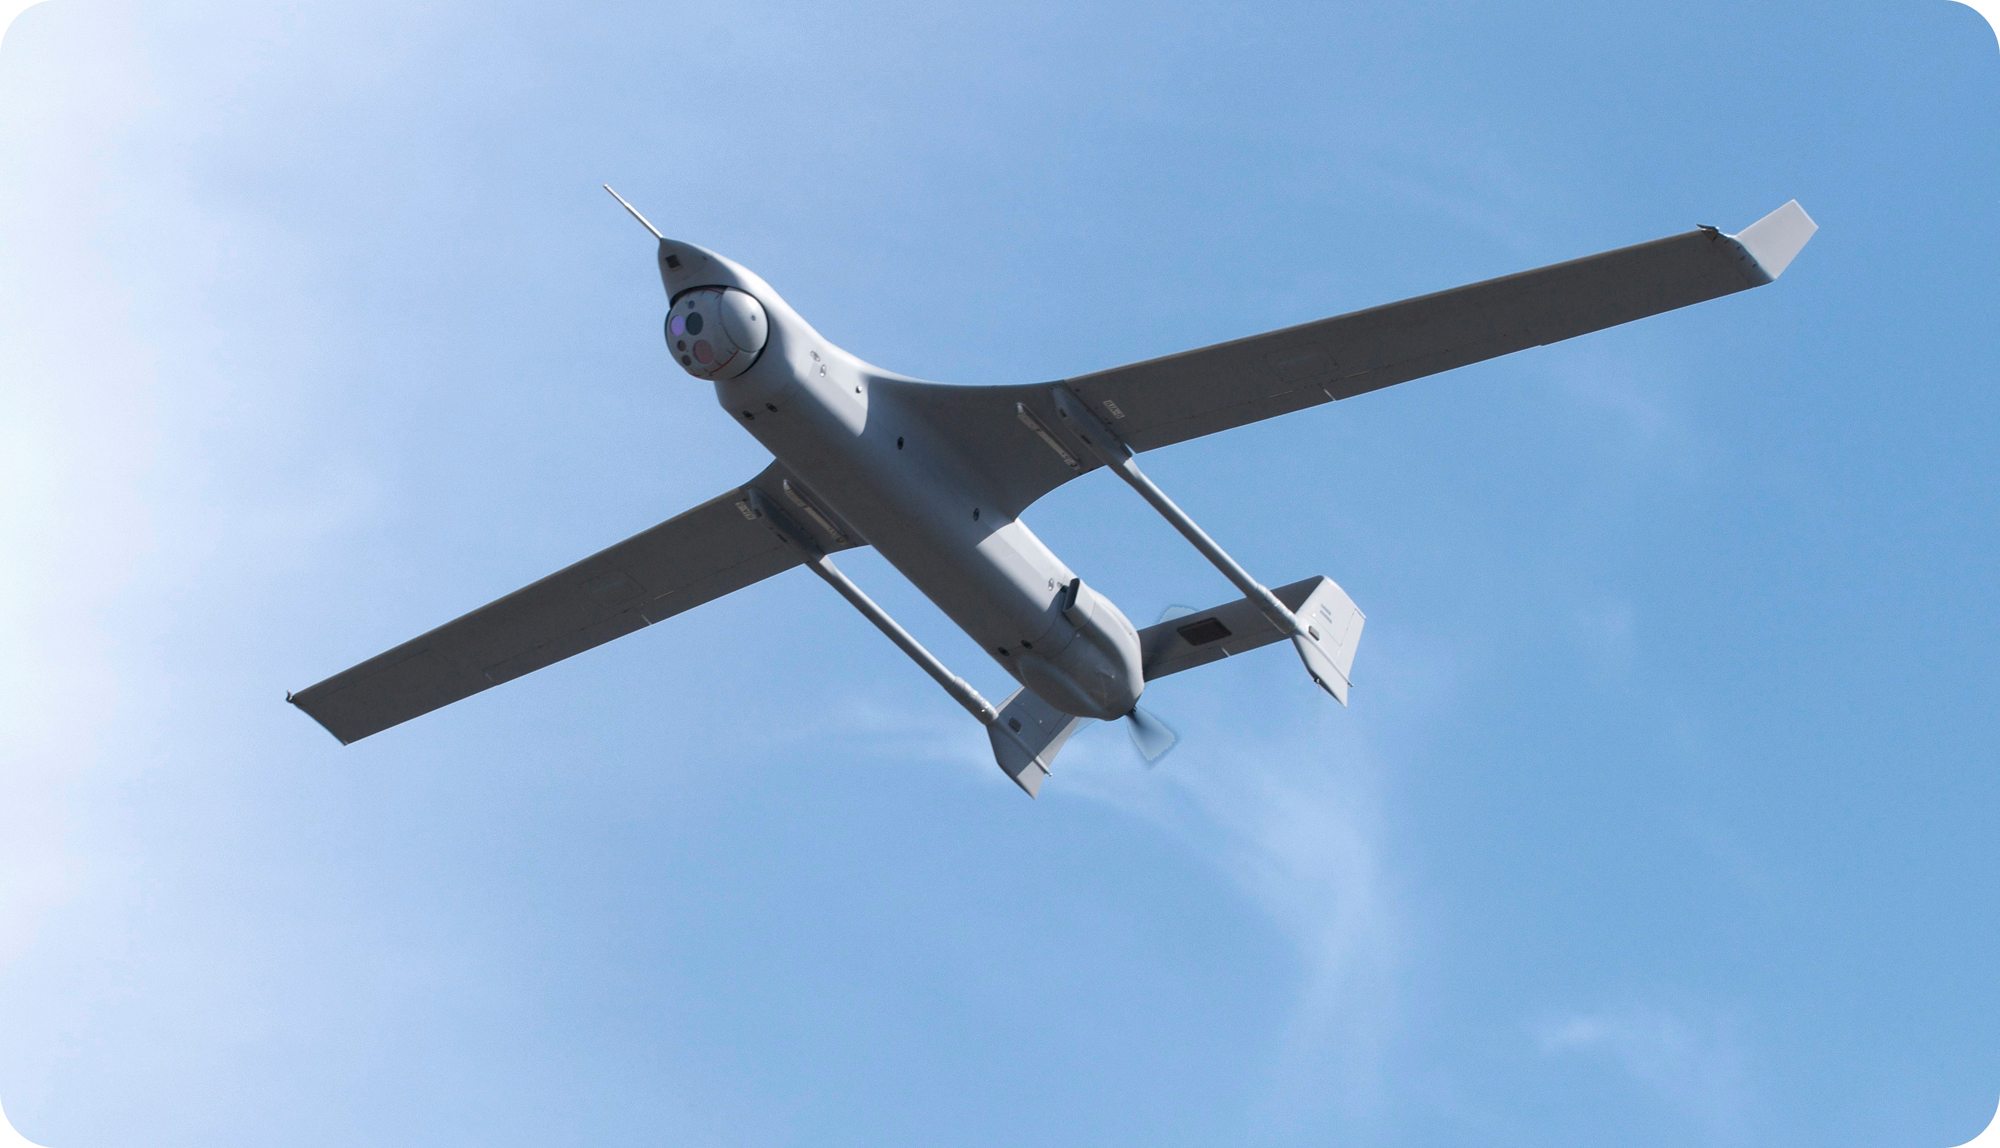 An Integrator unmanned aircraft takes a test flight.